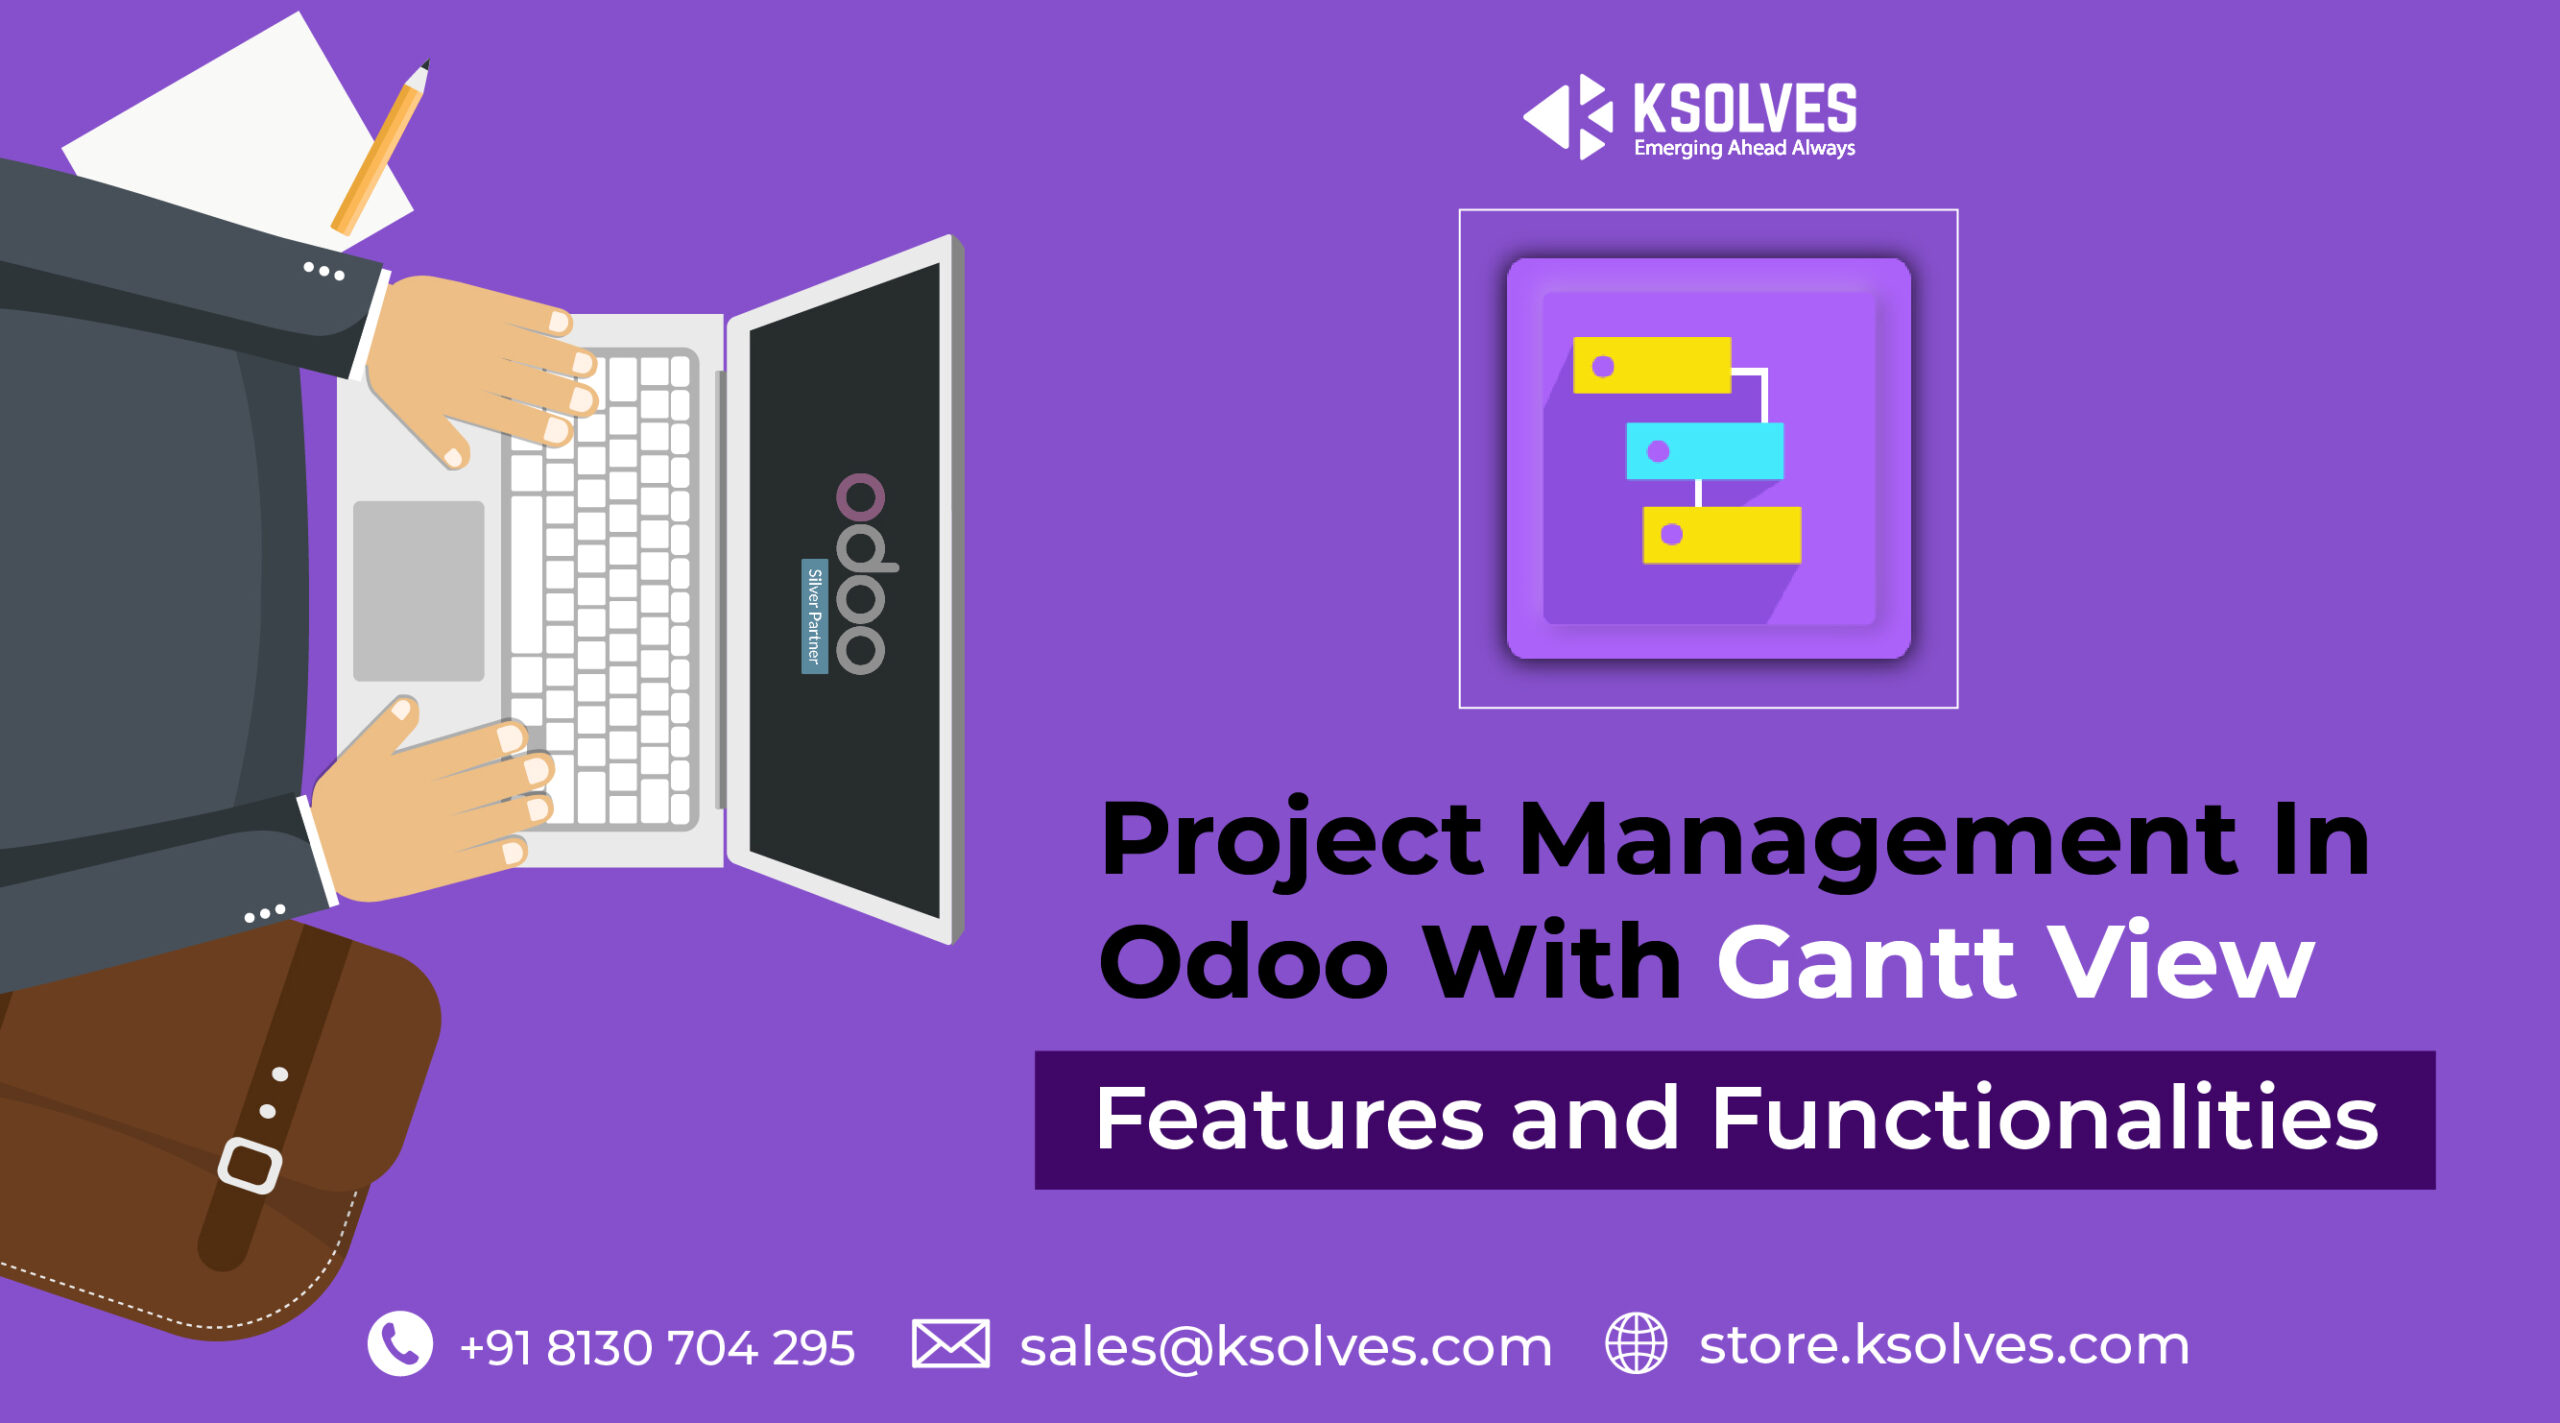 Project Management In Odoo With Gantt View: Features and Functionalities